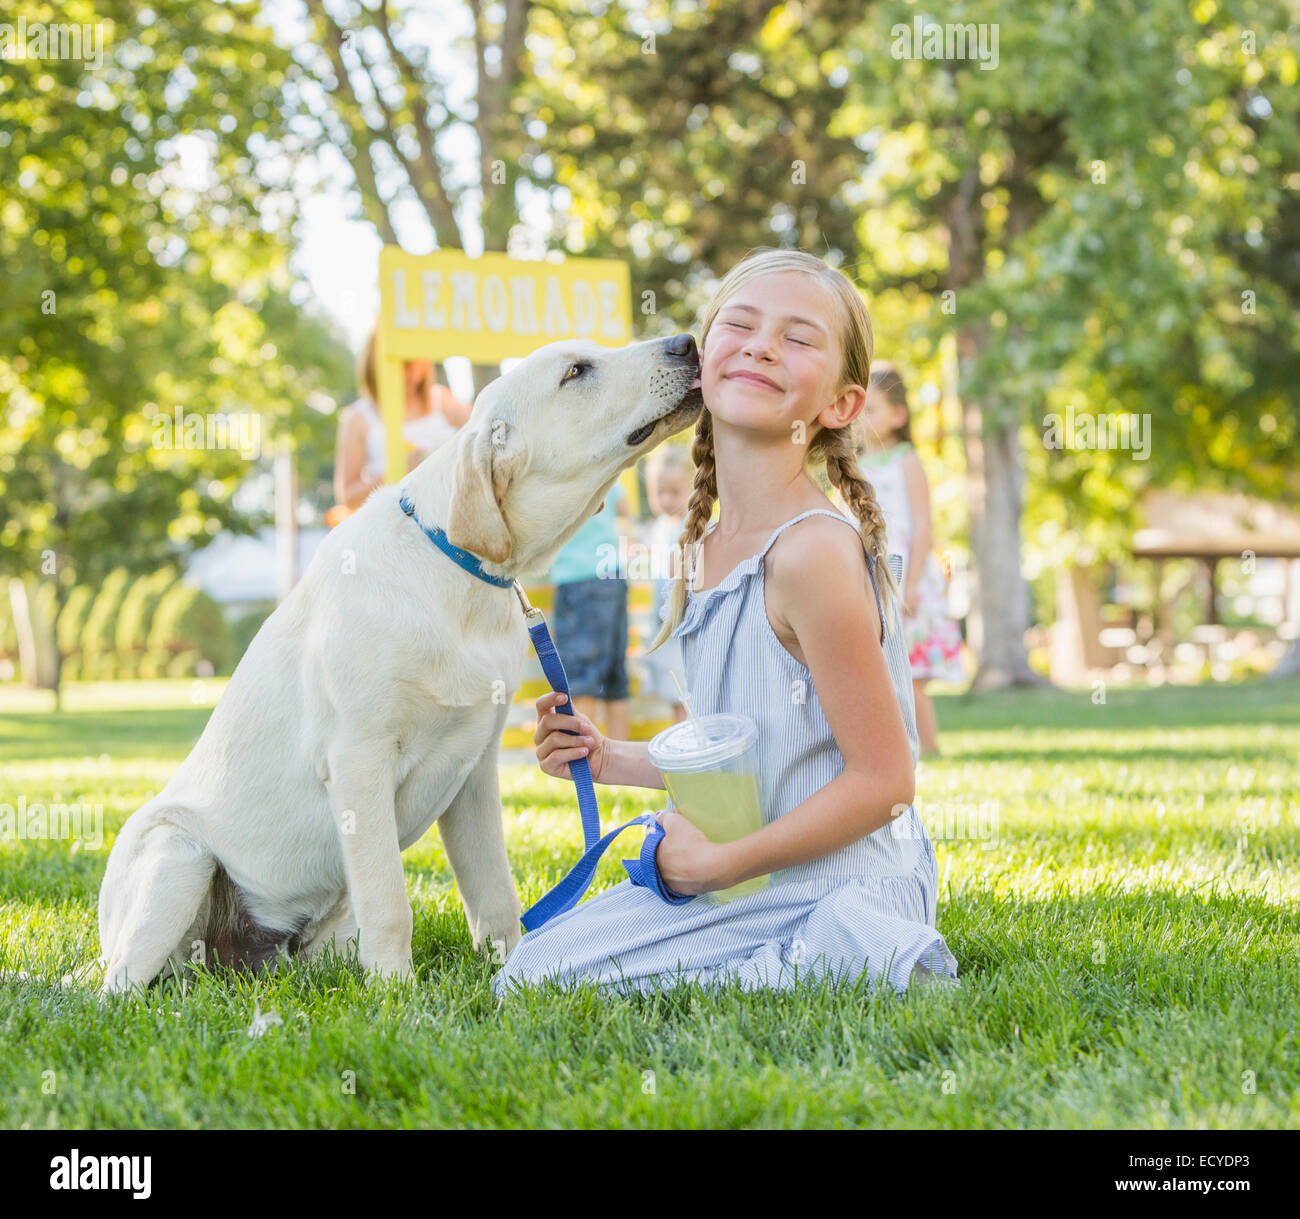 Pet dog licking face of Caucasian girl on grassy lawn Stock Photo